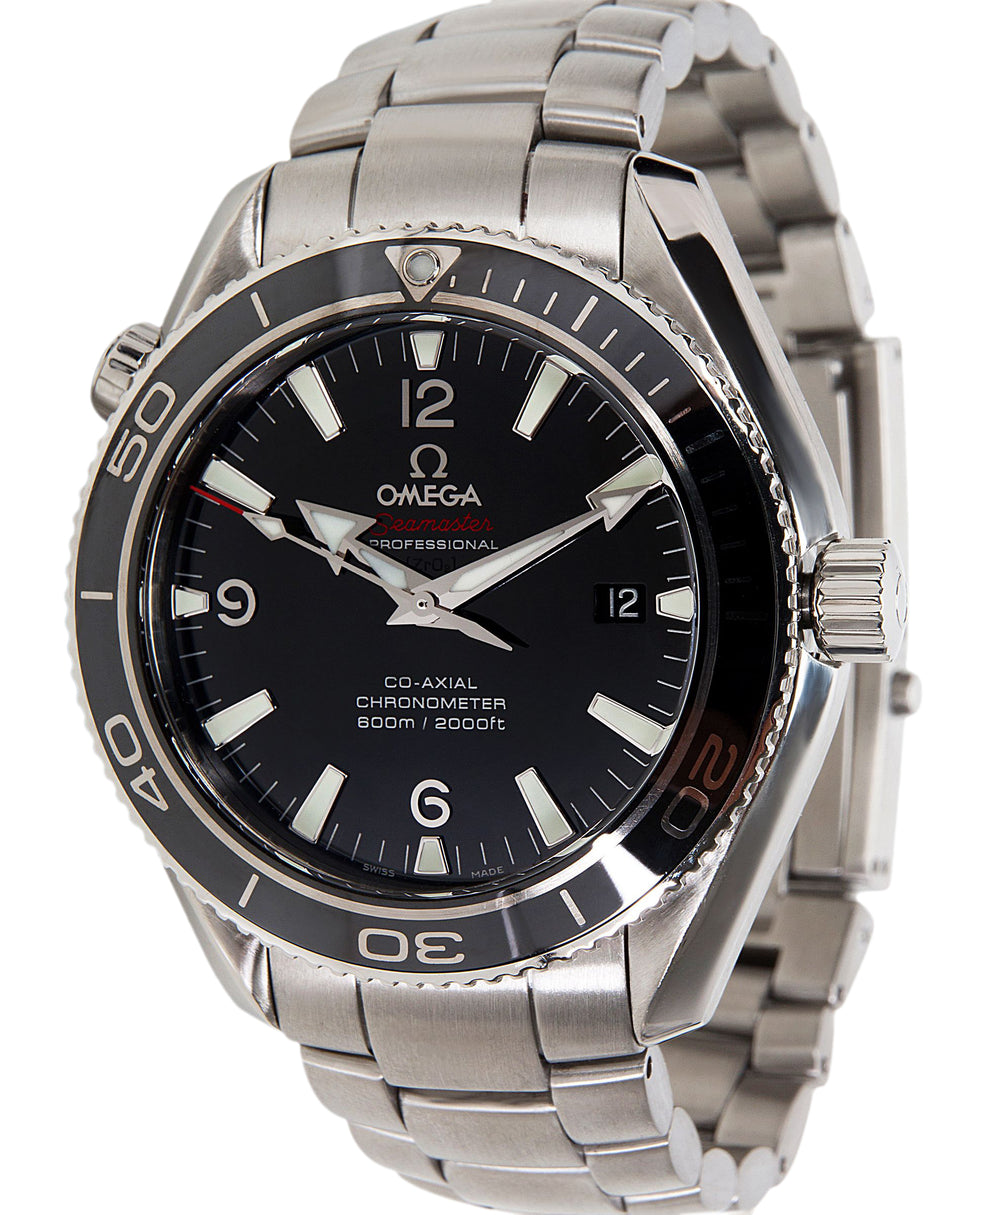 OMEGA Seamaster Planet Ocean 600M Co-Axial Liquidmetal™ Limited Edition 222.30.42.20.01.001 2